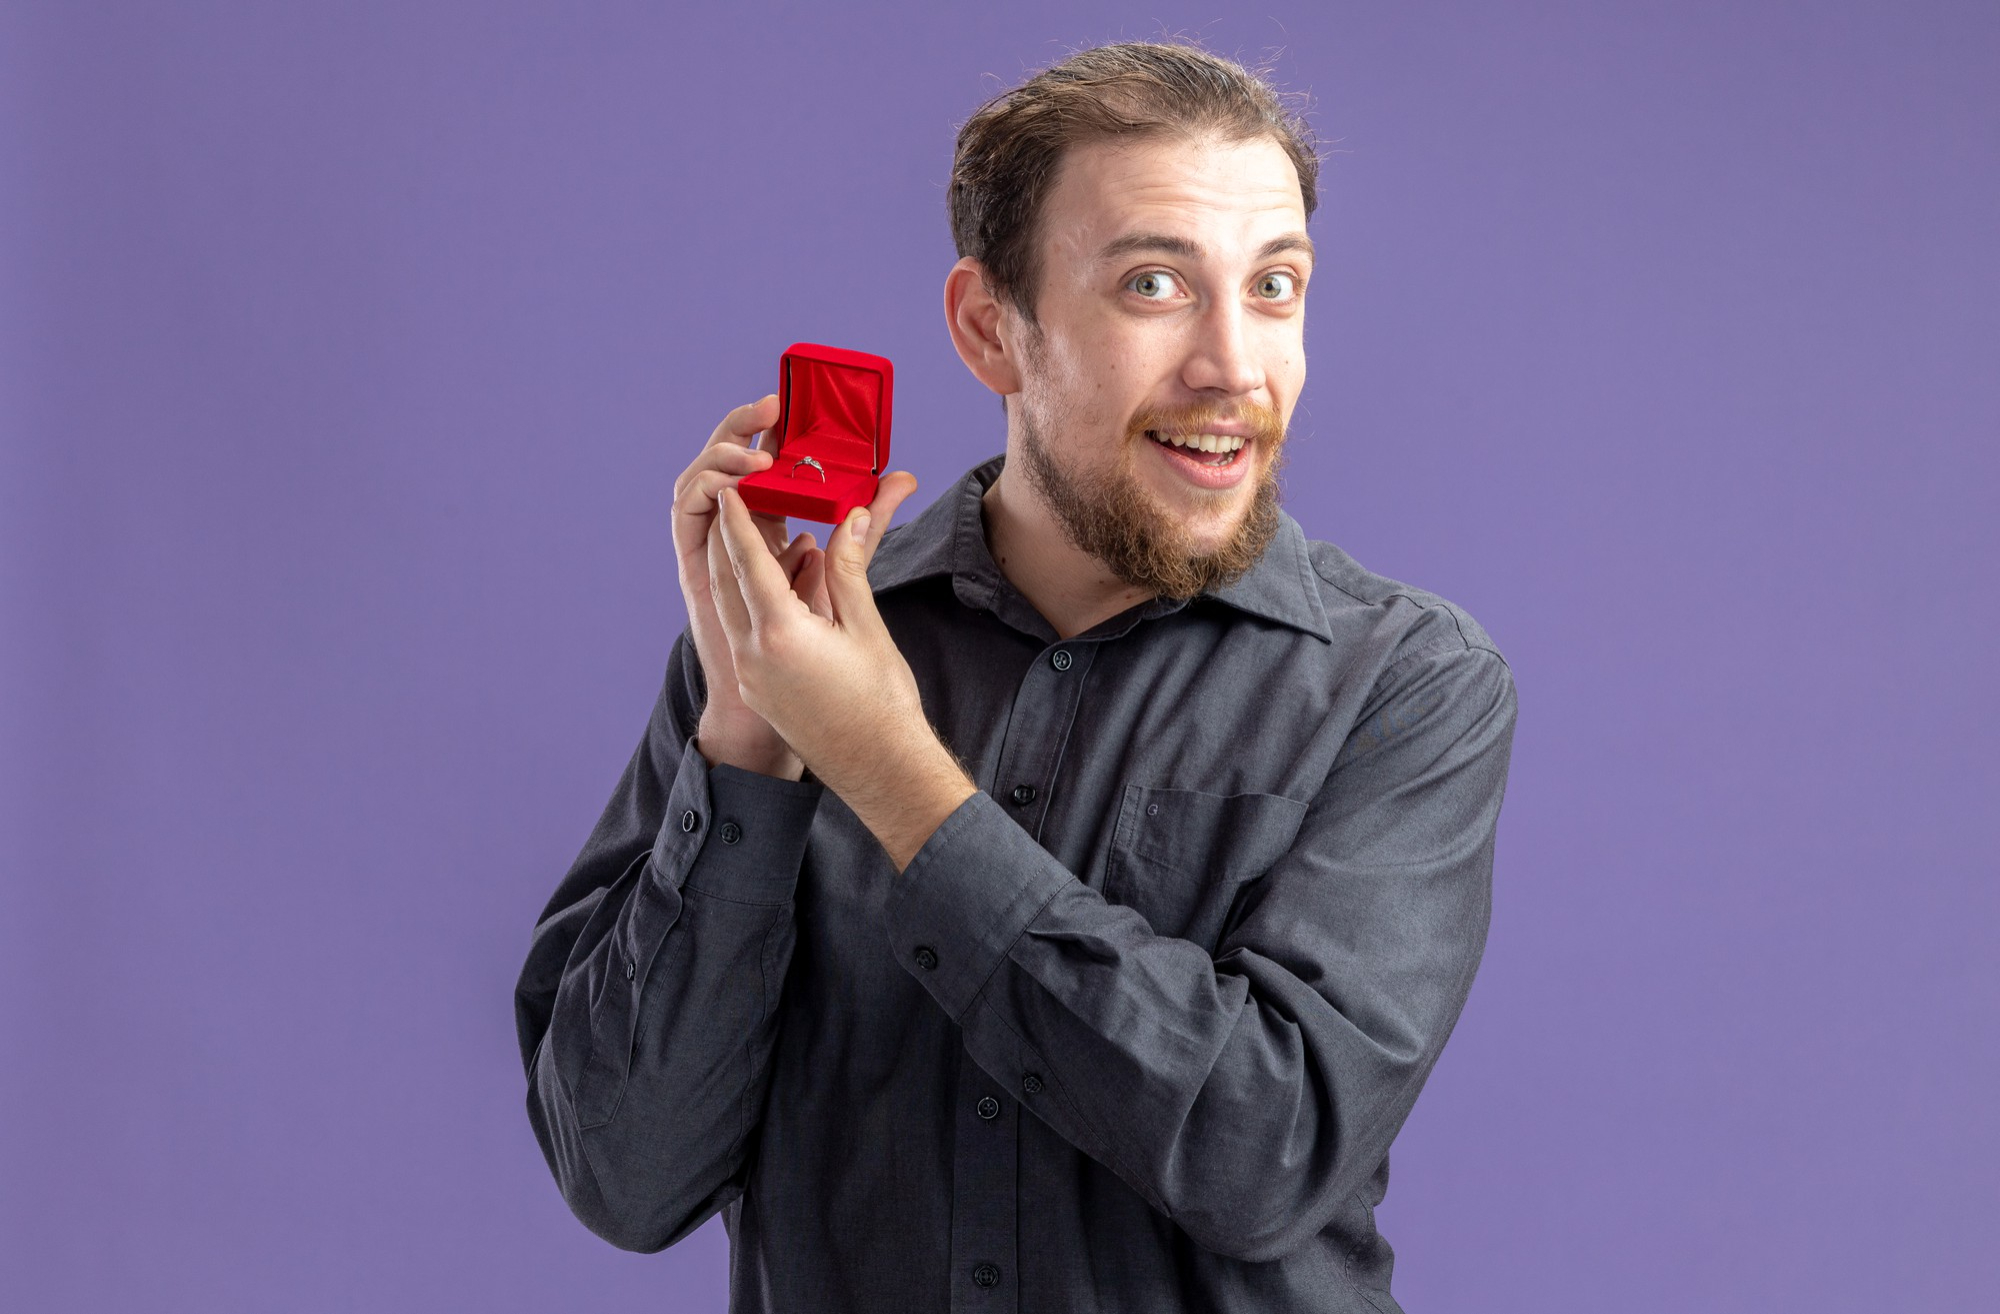 A happy man showing off a ring in a box | Source: Freepik